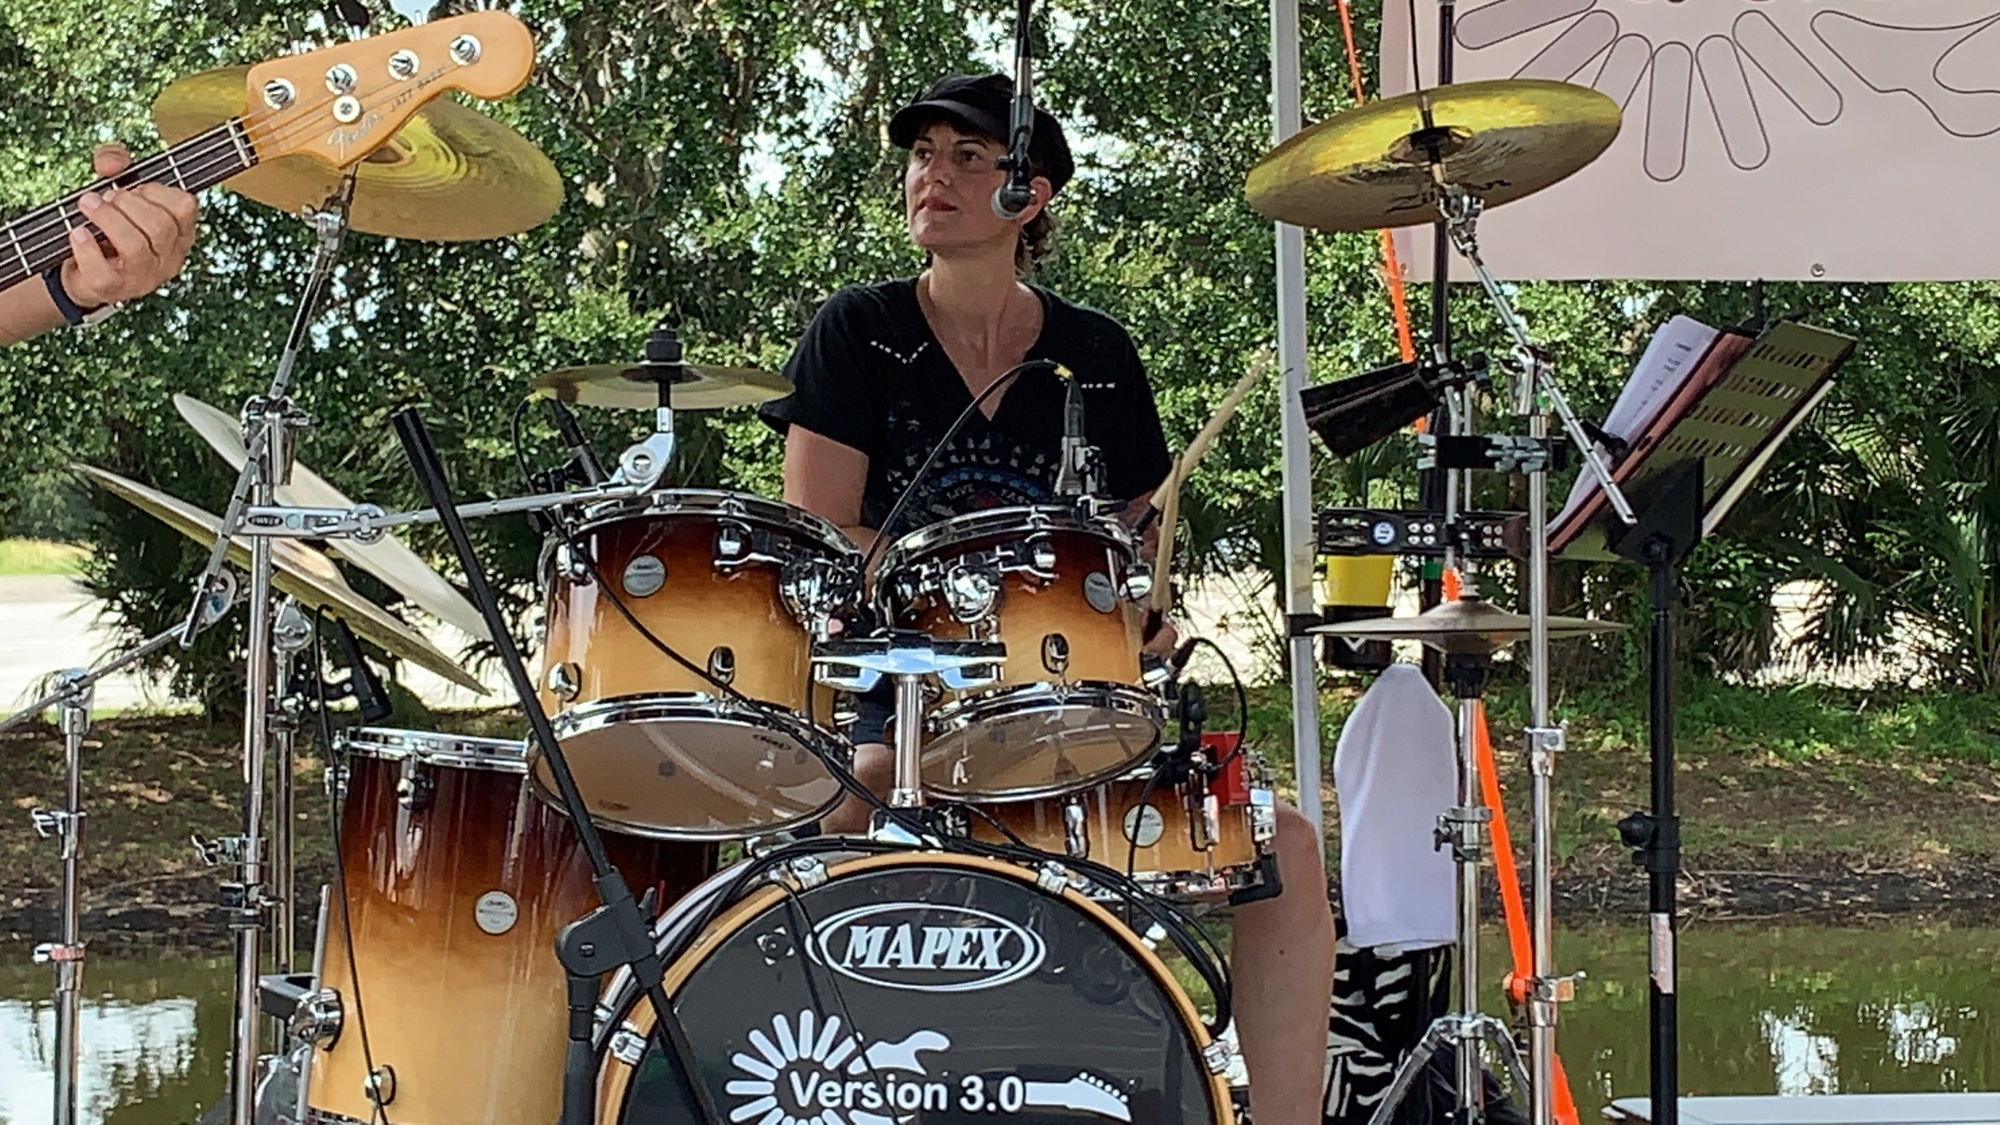 Courtesy, photo by James 'Jay' Dodge II. Sharon Kunkel performed with her band, Version 3.0, during the Rossiter's Harley-Davidson 29th Anniversary Party.